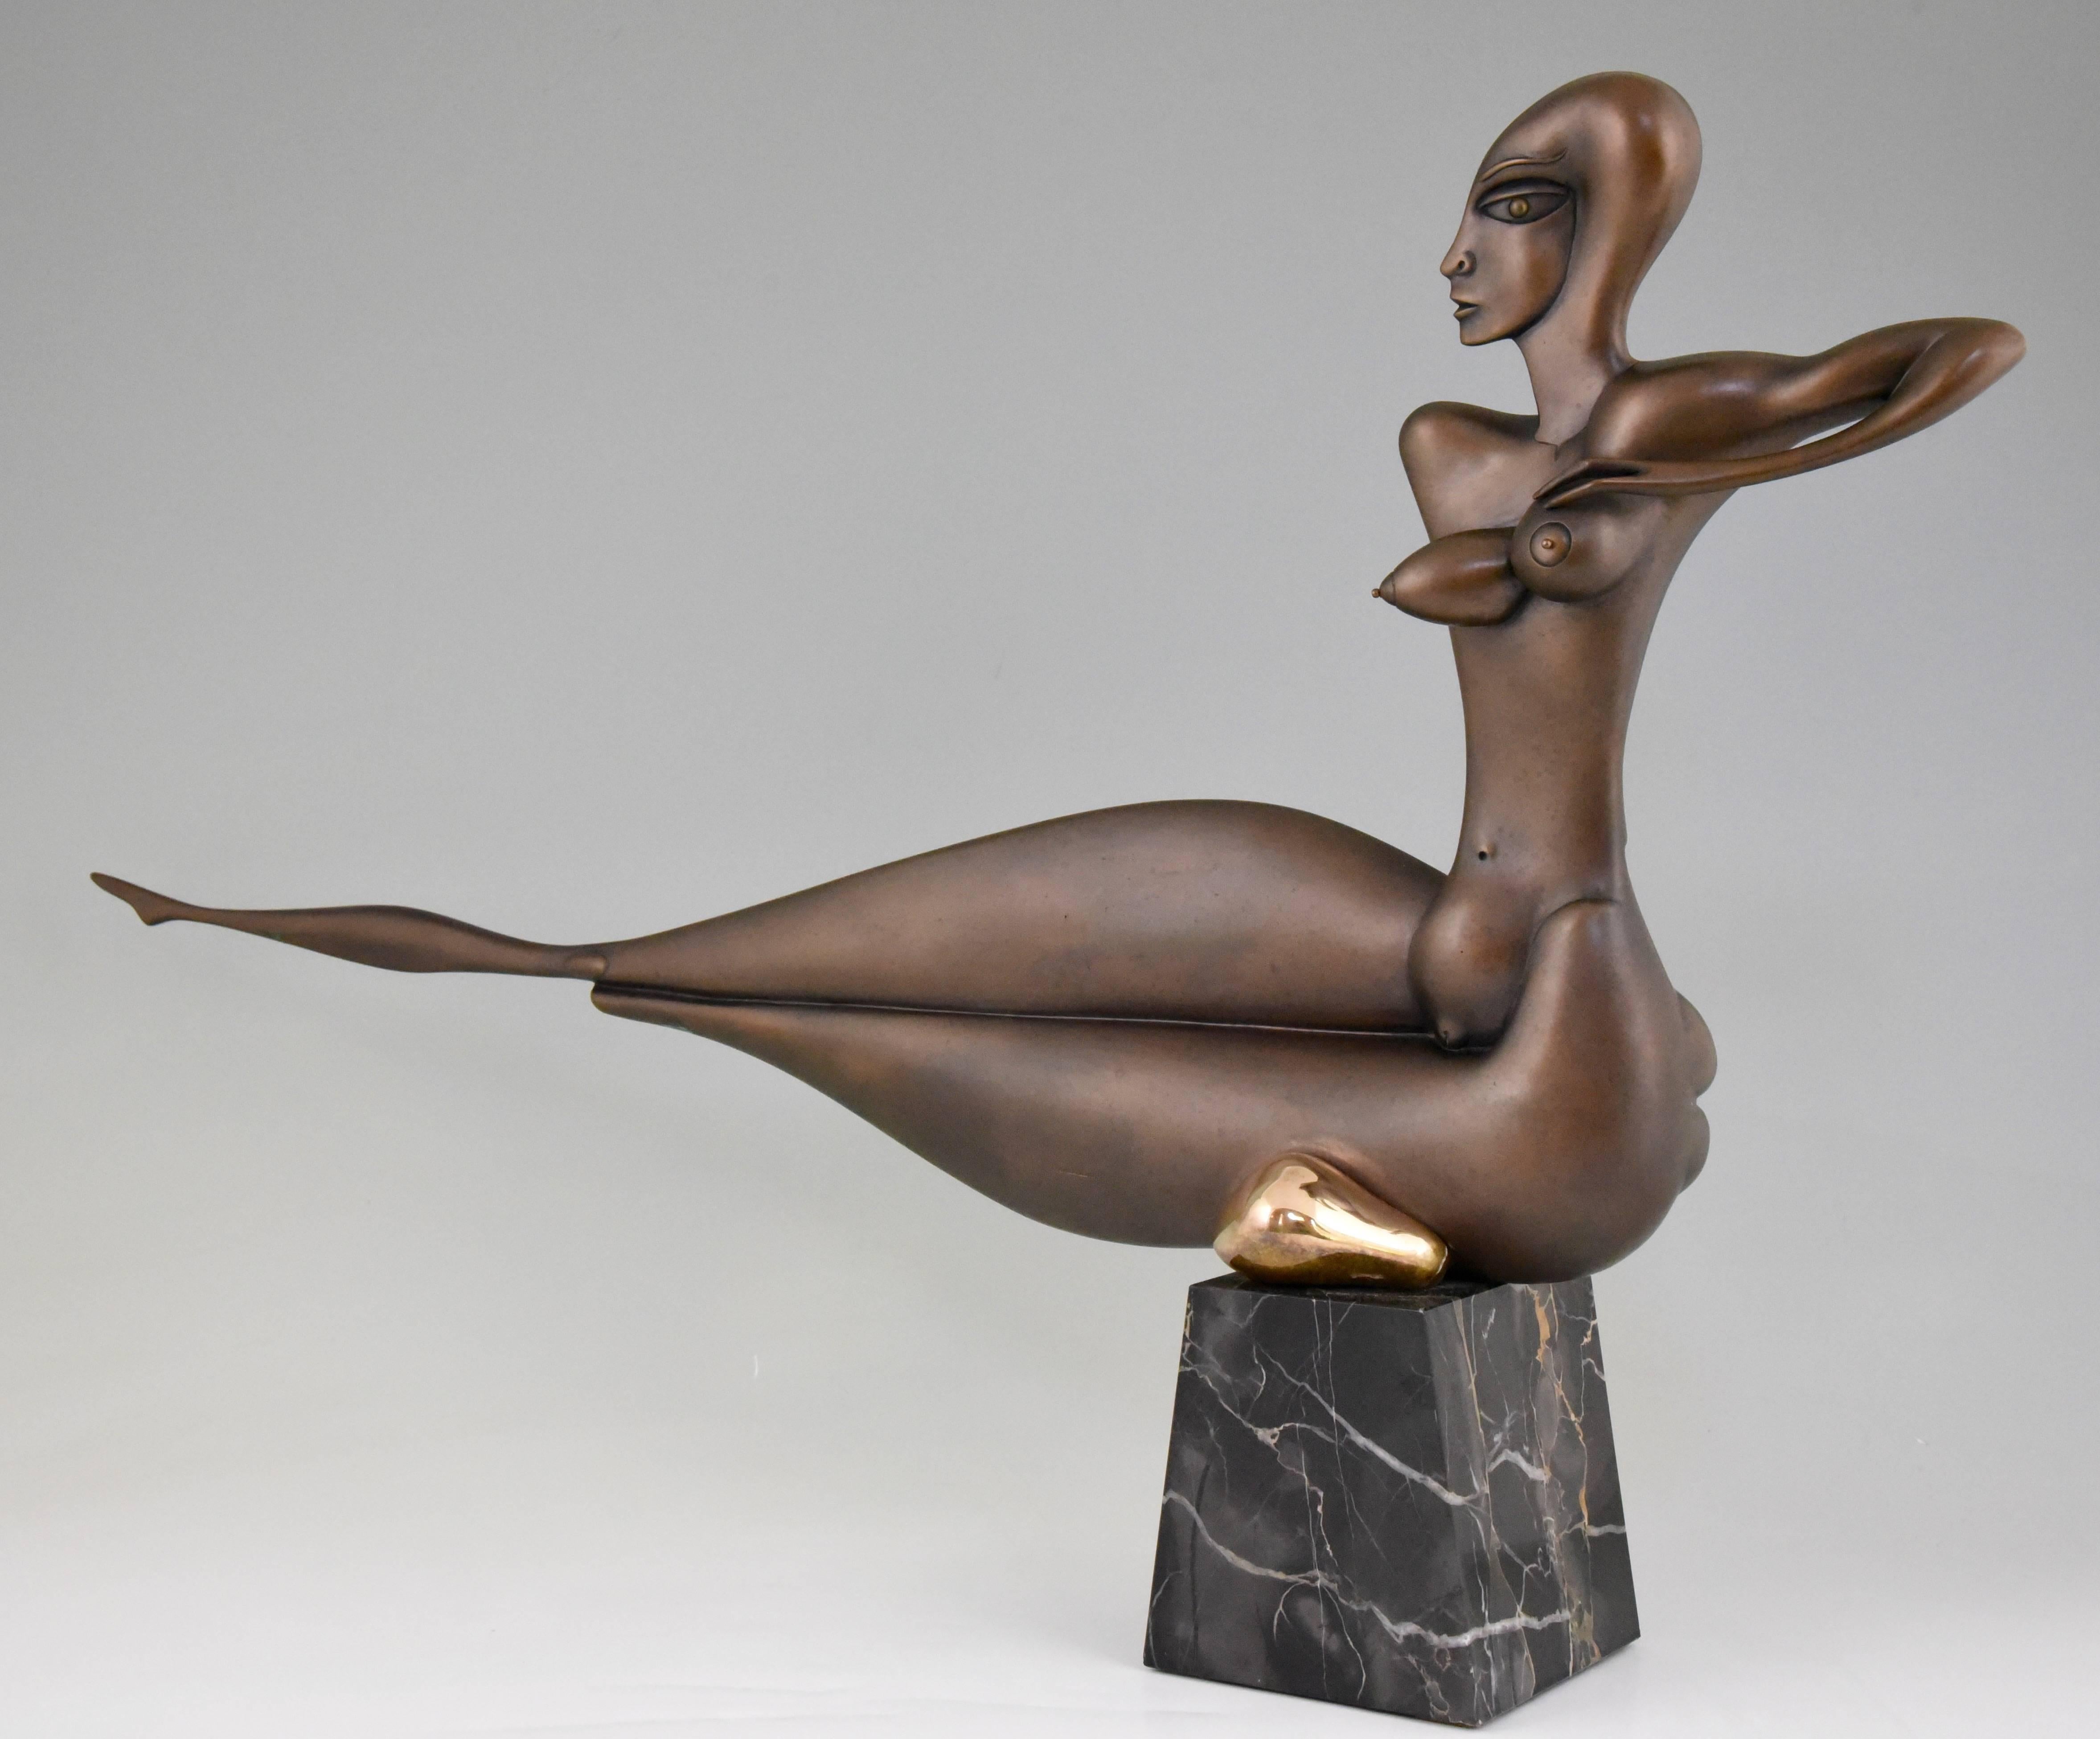 Modern bronze sculpture of a nude by Paul Wunderlich (1927-2006)
painter, sculptor and graphic artist.
He designed surrealist paintings and erotic sculptures, often inspired by mythological legends.

Artist/ Maker: Paul Wunderlich
Signature/